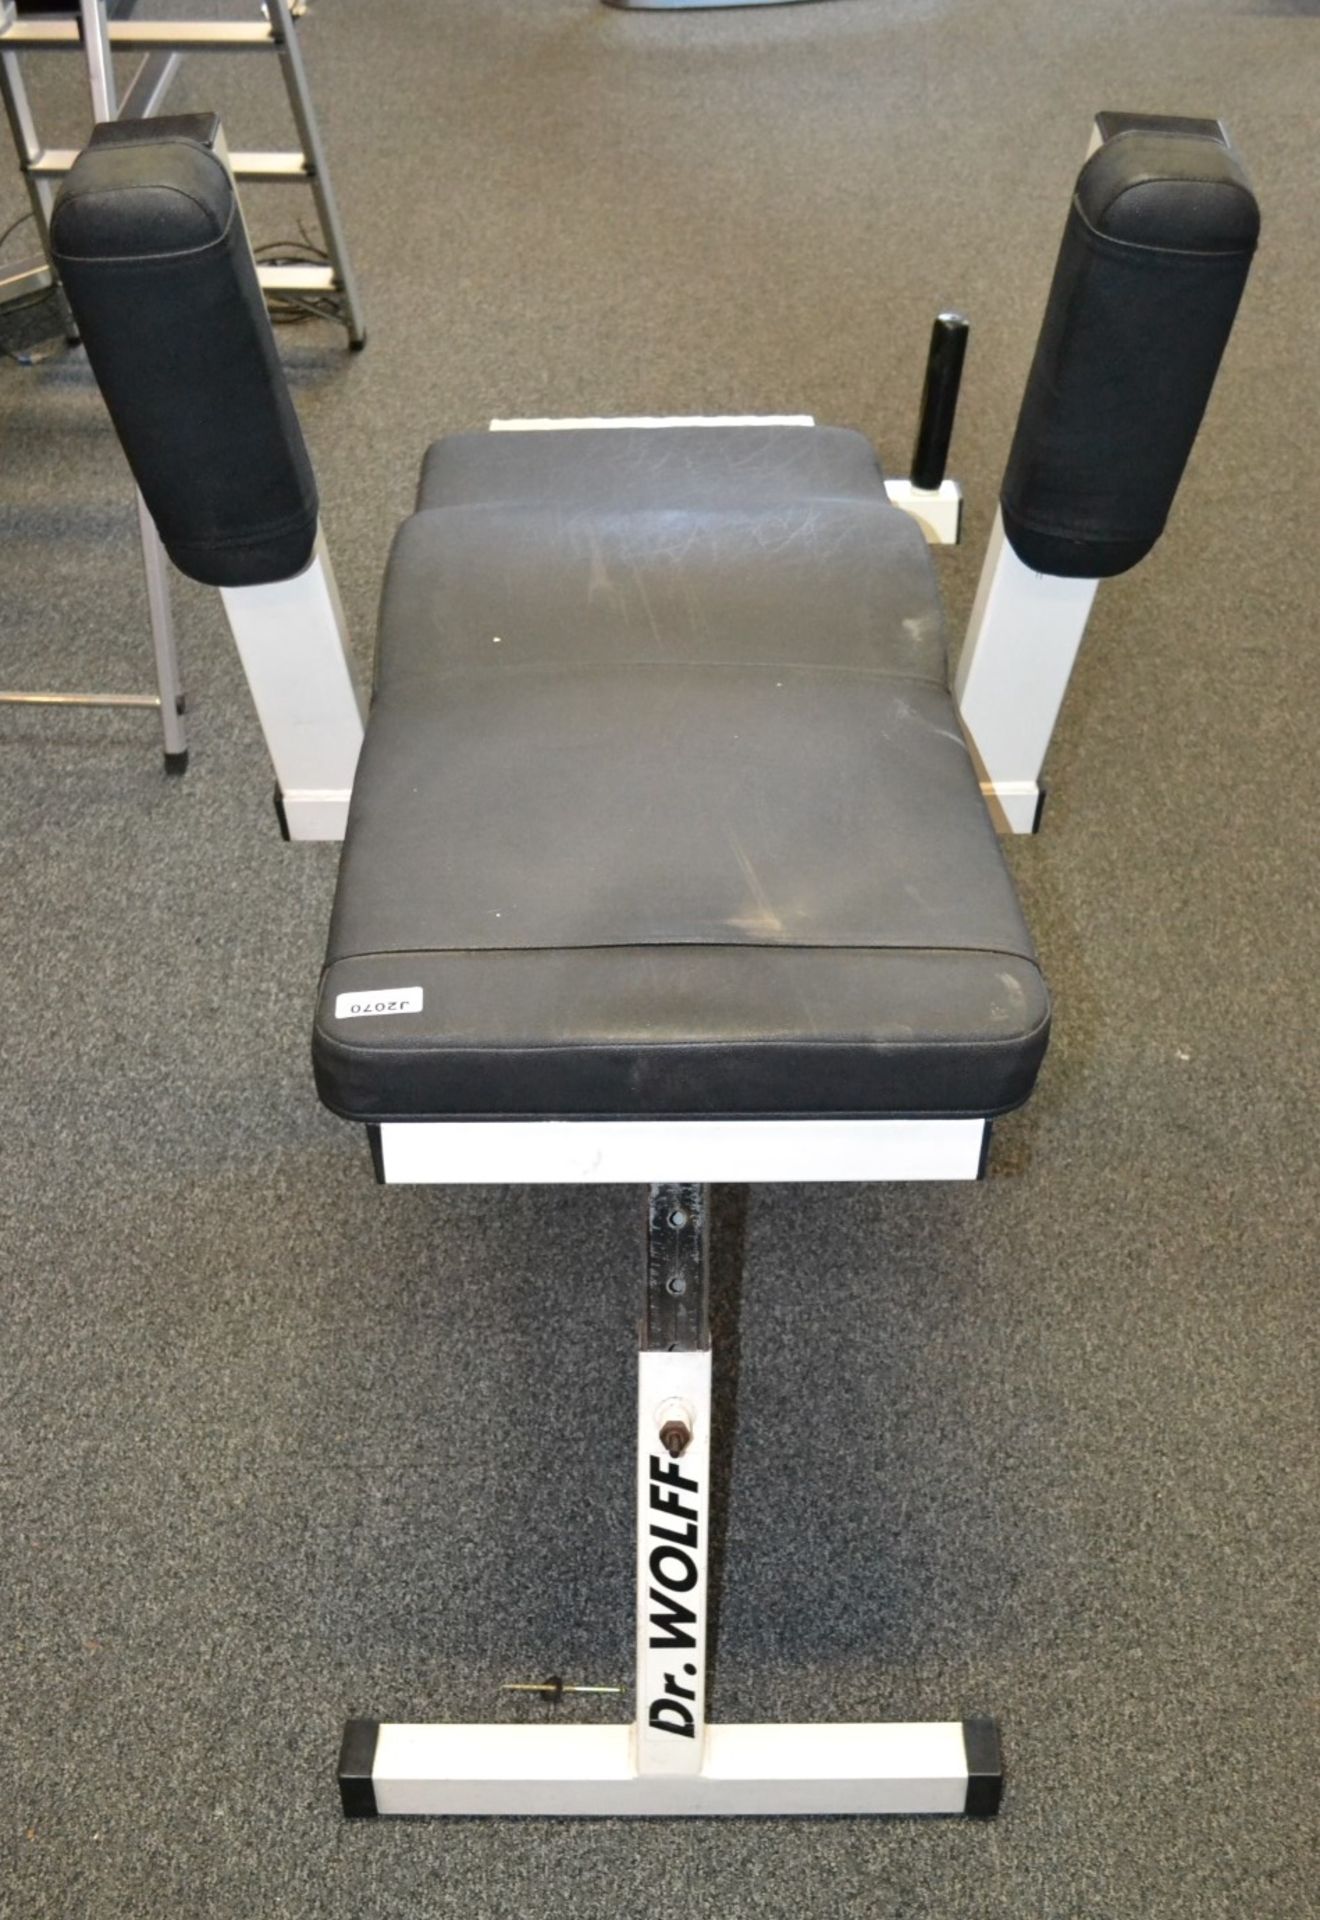 1 x Dr.Wolff Abdominal Fitness Bench - Dimensions: L140 x H100 x W50cm - Ref: J2070/1FG - CL356 - - Image 3 of 3